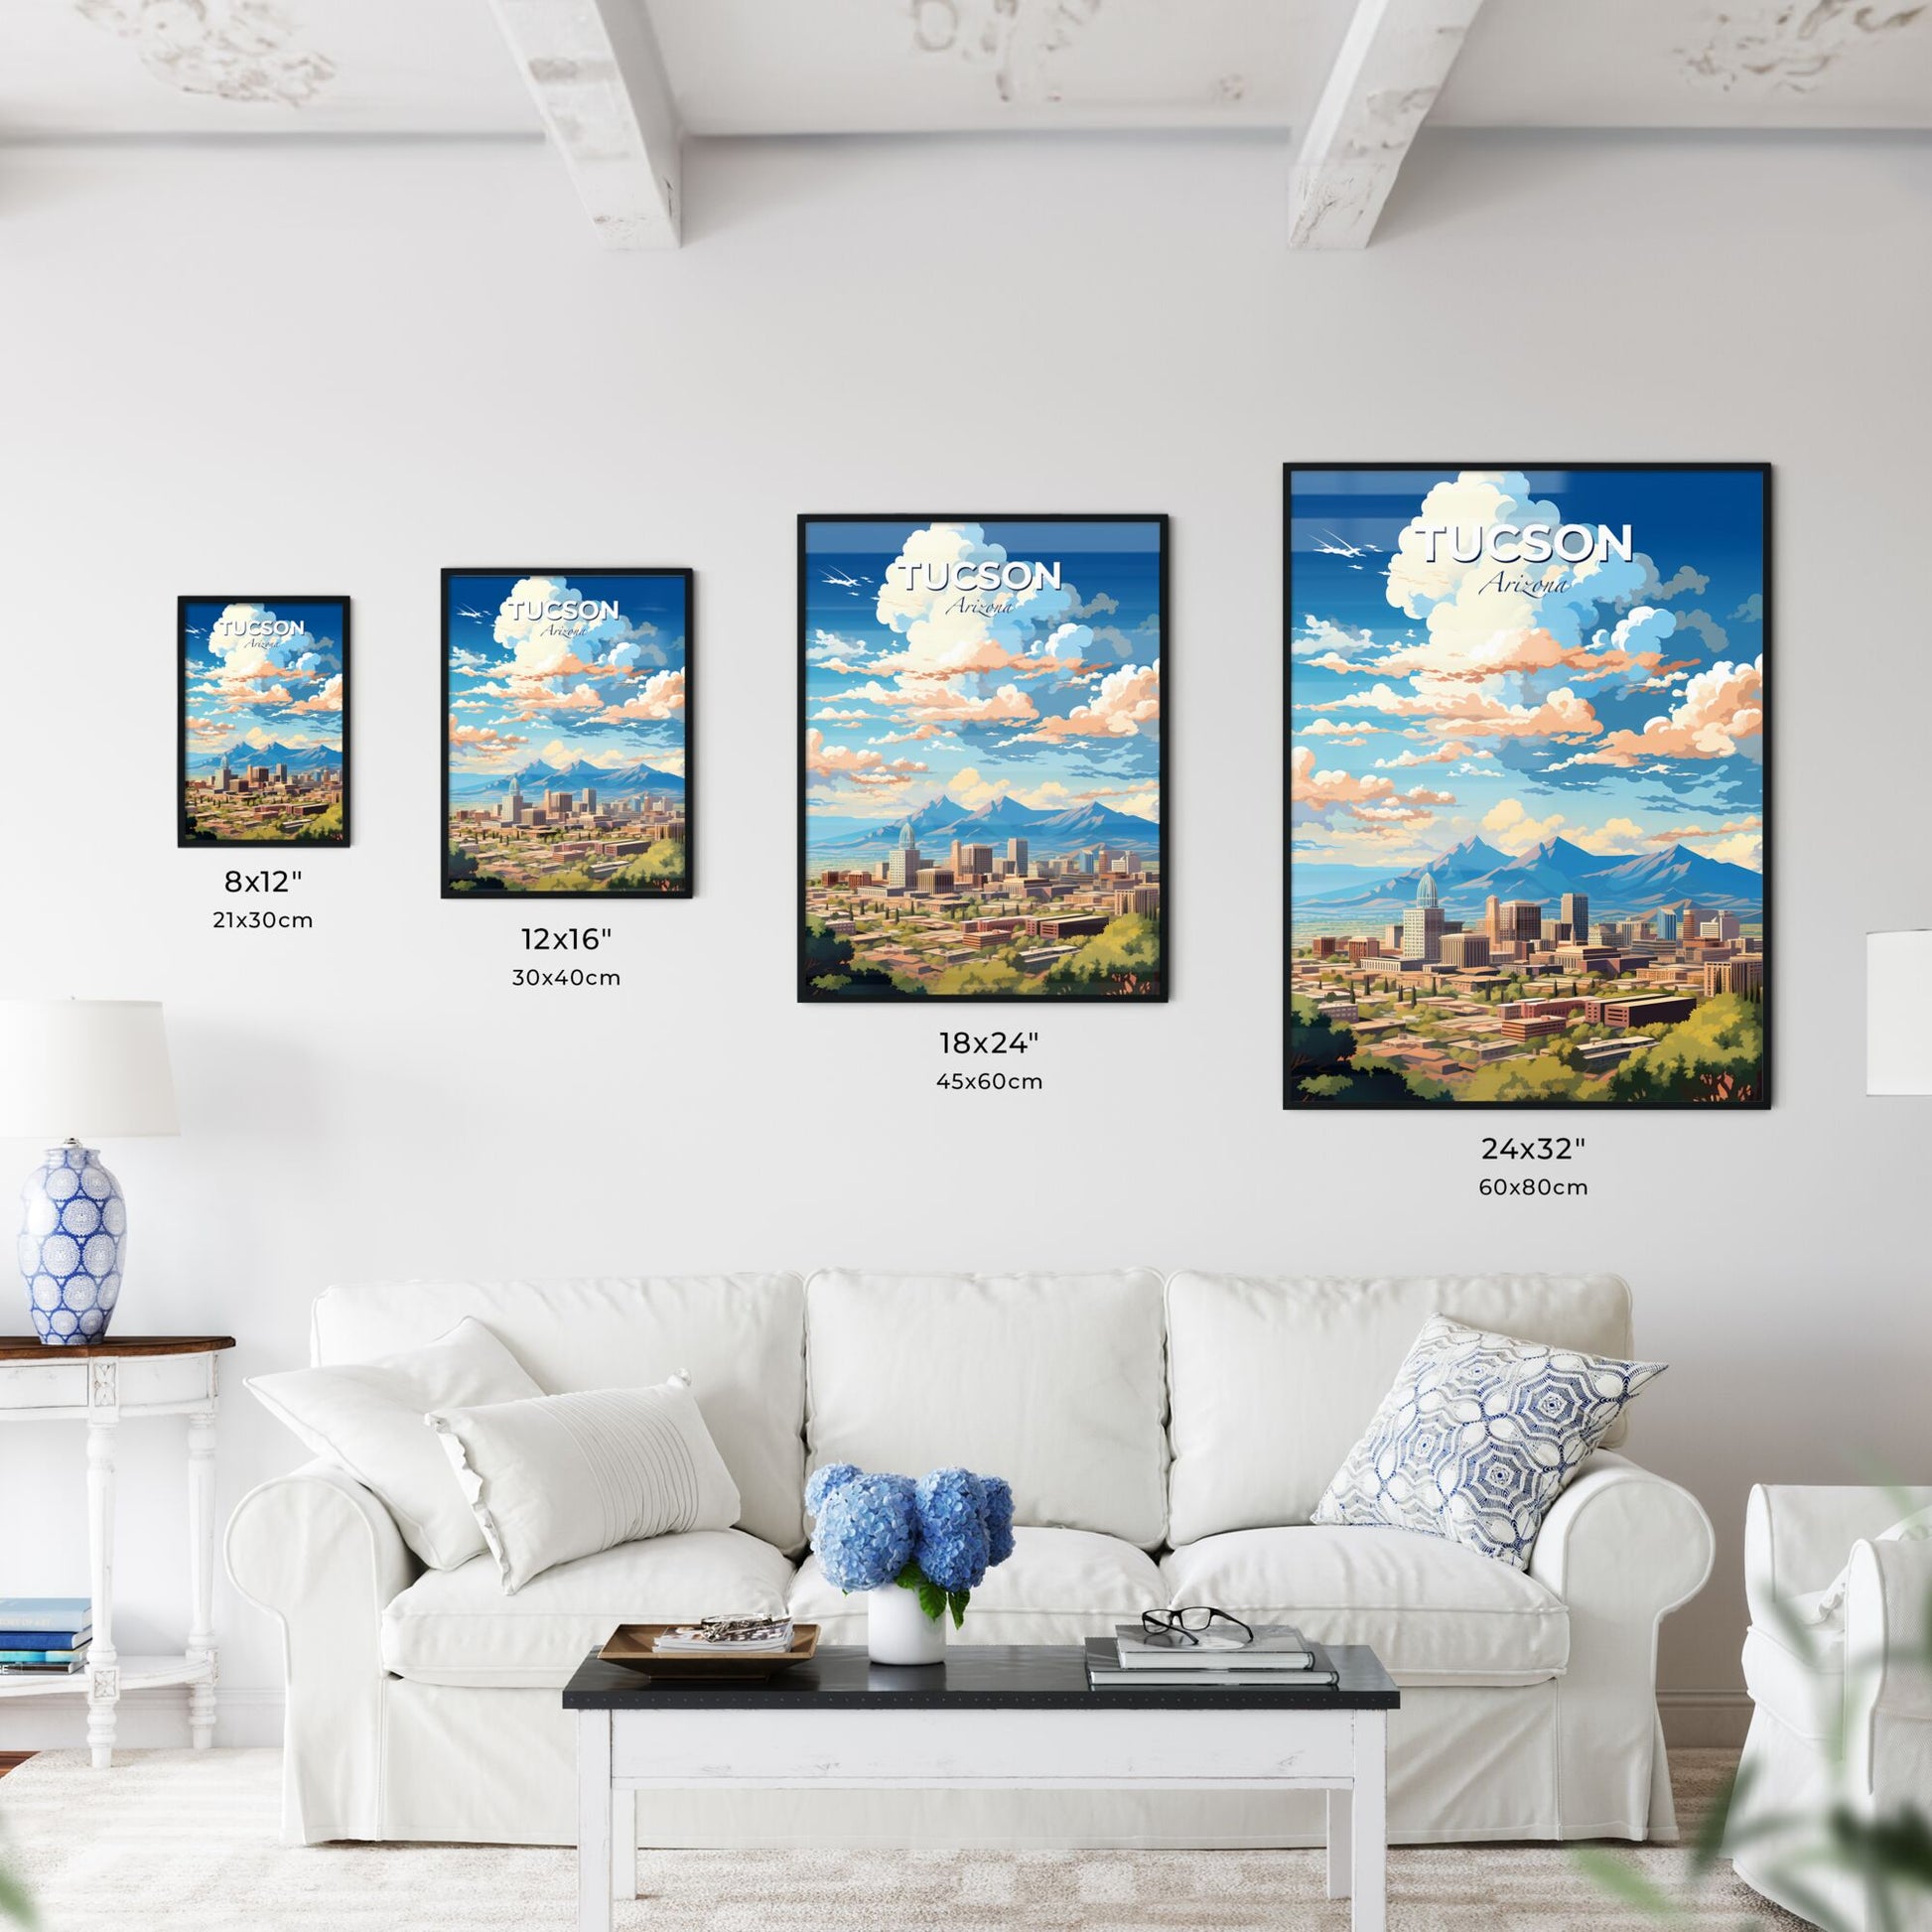 Tucson Arizona Skyline - A City With Mountains In The Background - Customizable Travel Gift Default Title